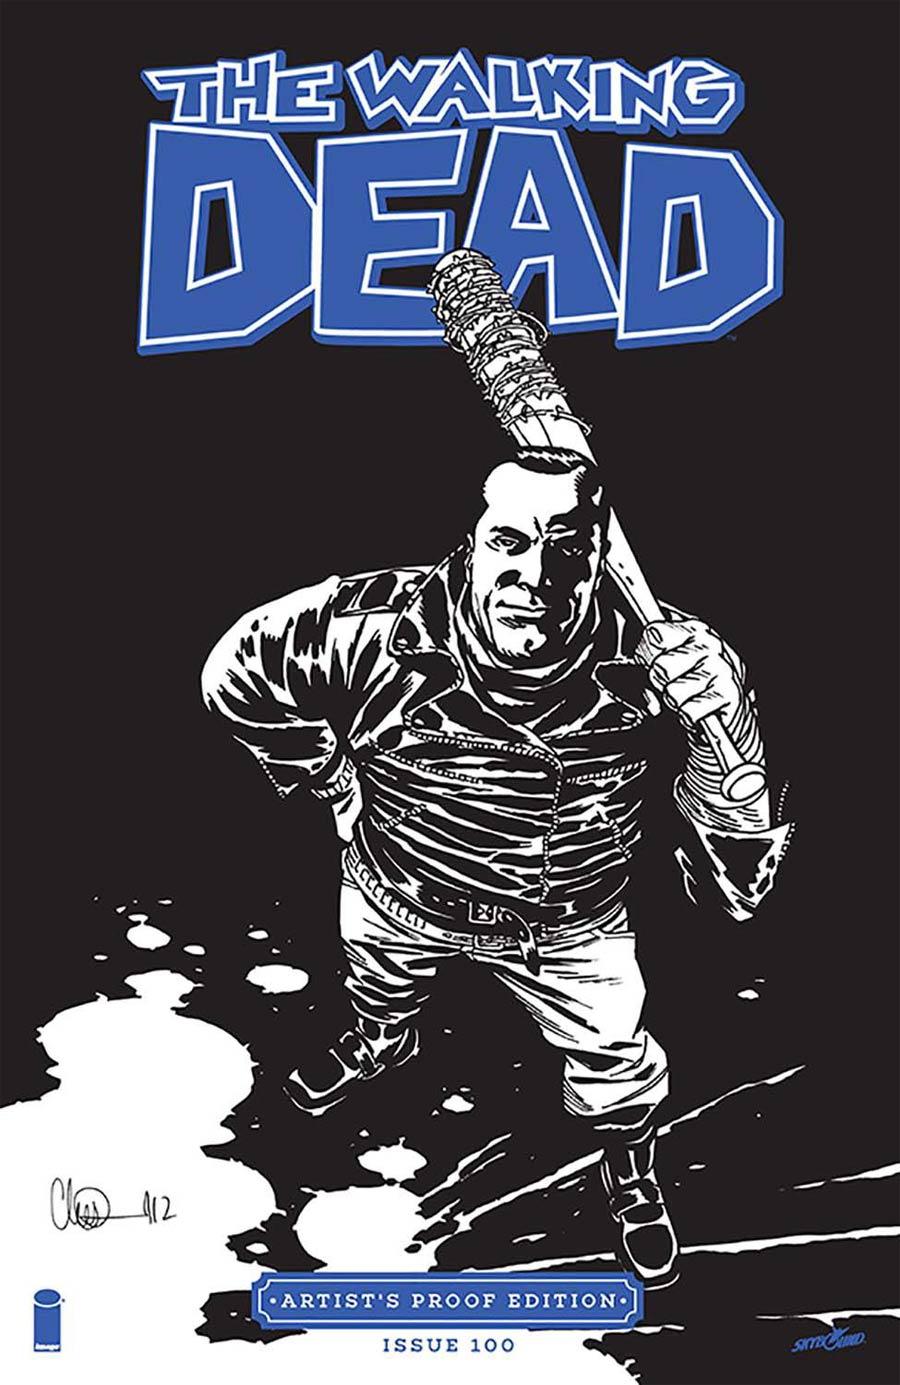 Image Giant-Sized Artists Proof Edition Walking Dead Vol. 1 #100